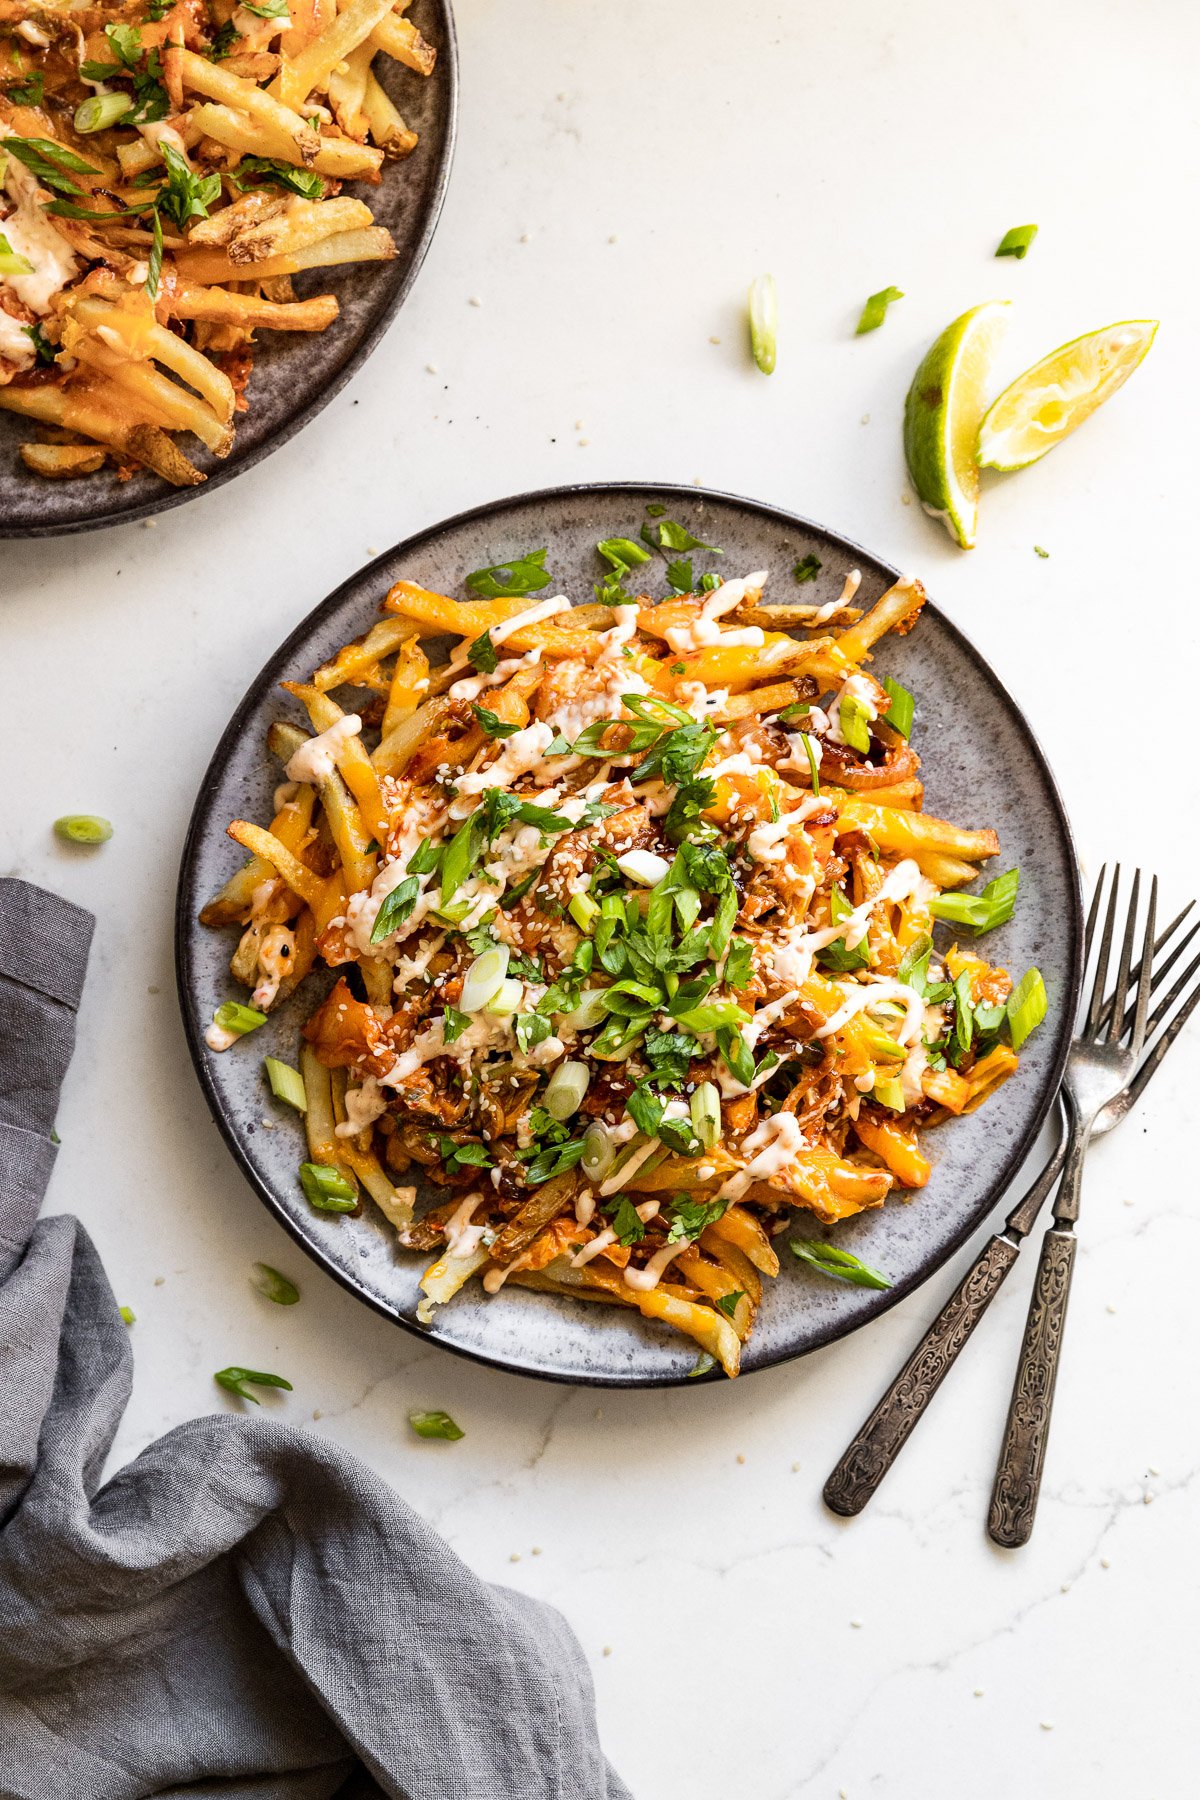 Plate of kimchi fries next to forks.